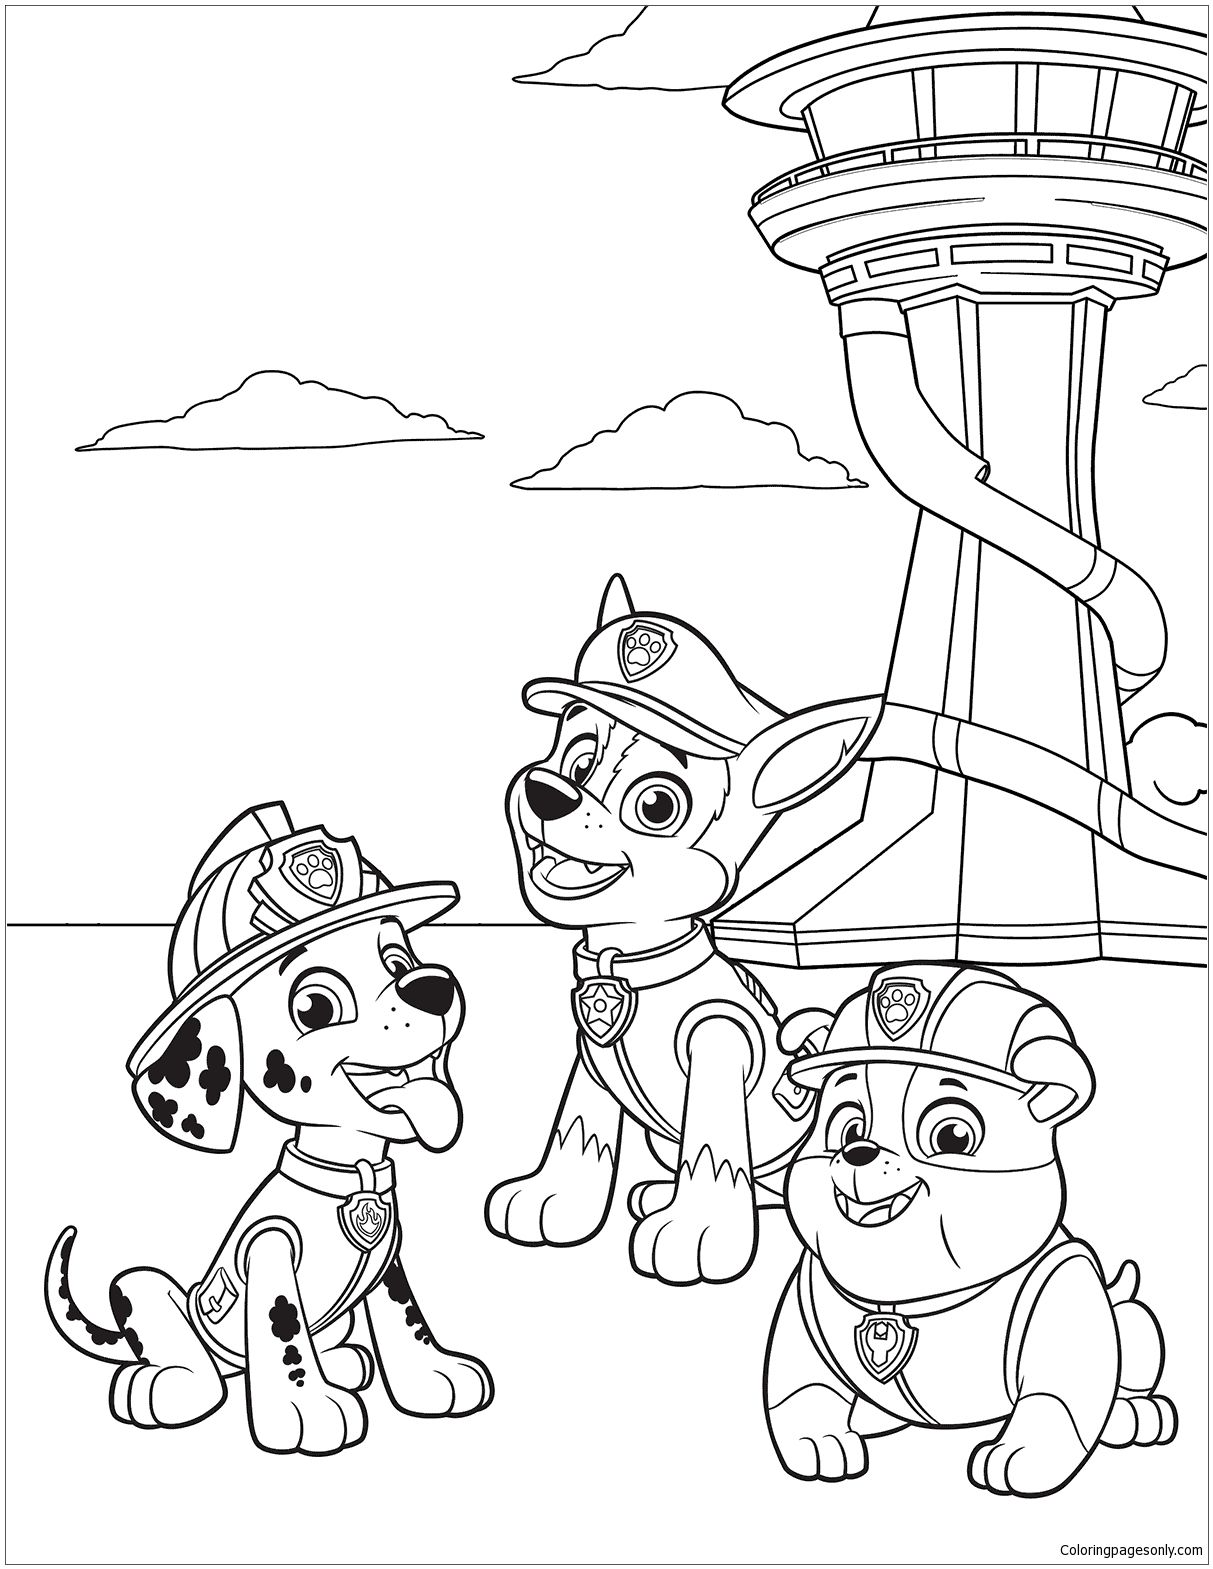 Paw Patrol Coloring Pages FREE Printable 43